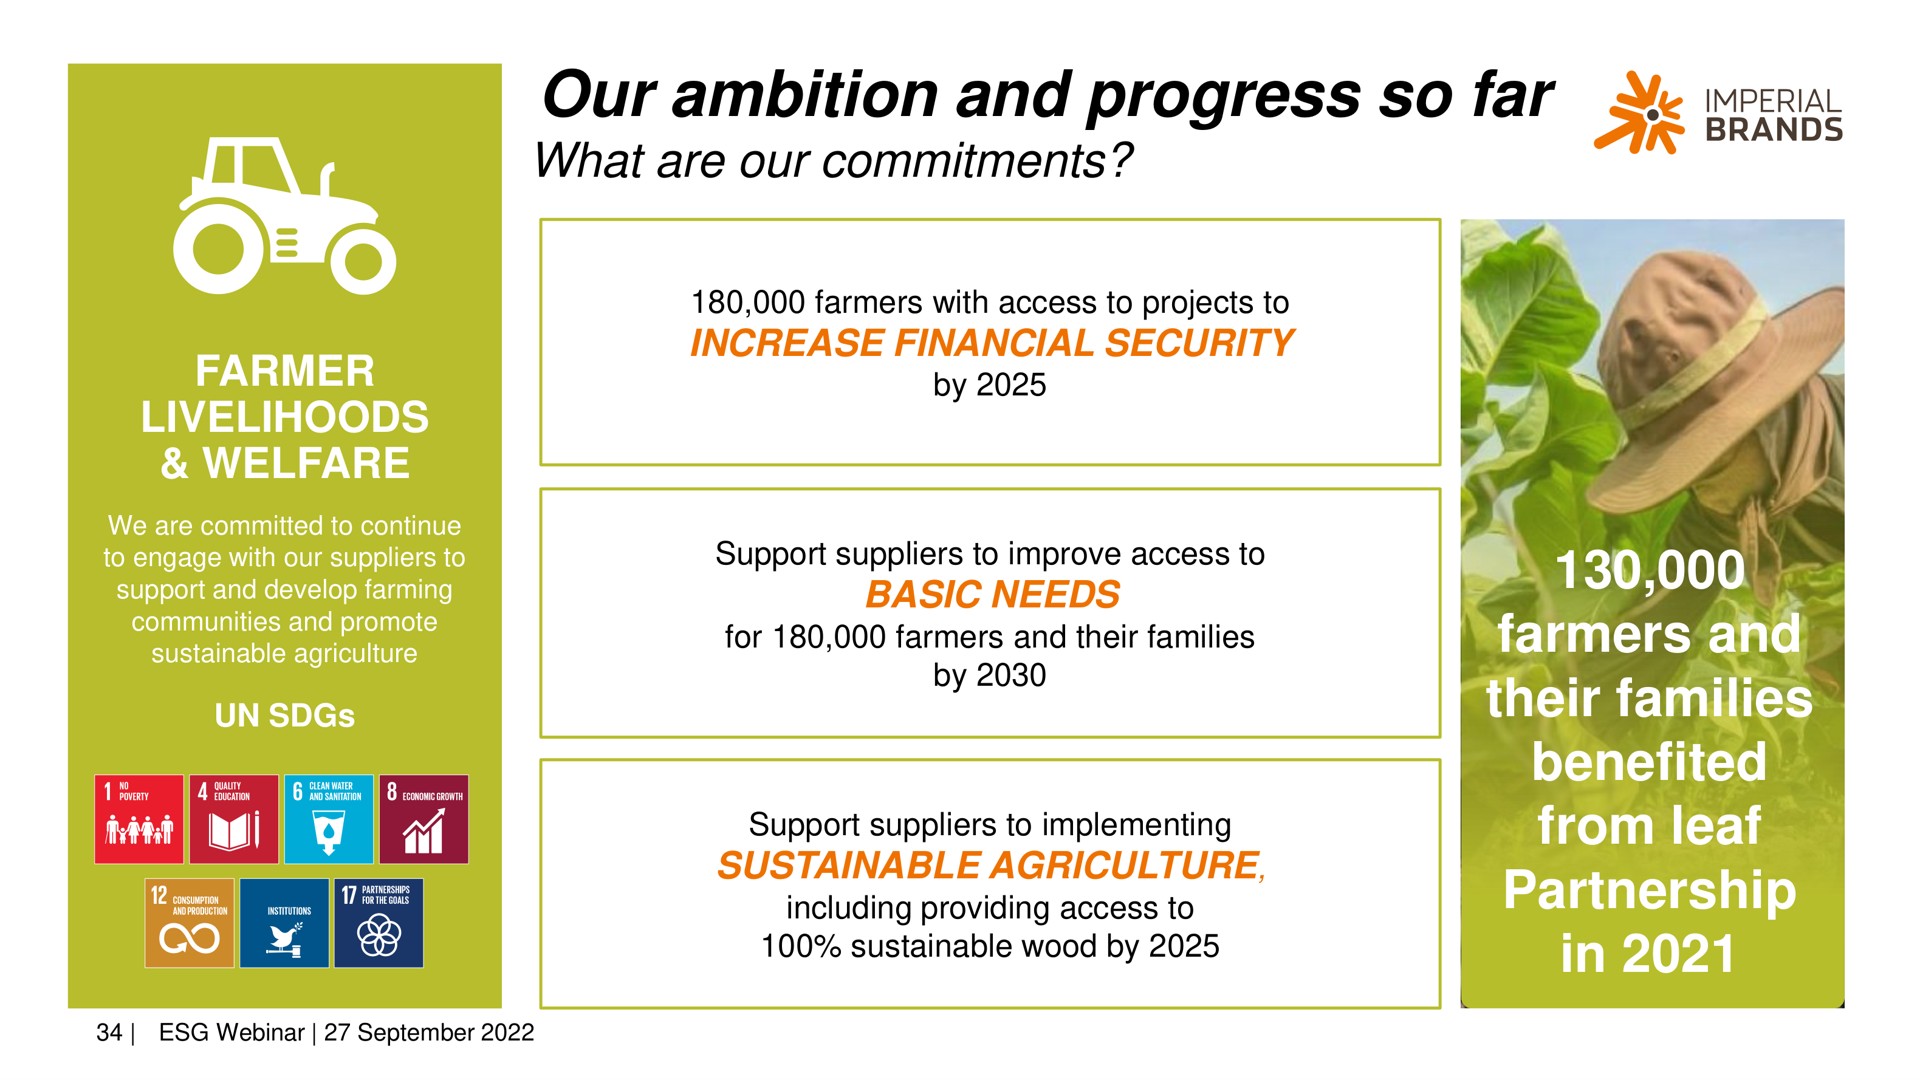 our ambition and progress so far farmers and their families benefited from leaf partnership in basic needs ree | Imperial Brands